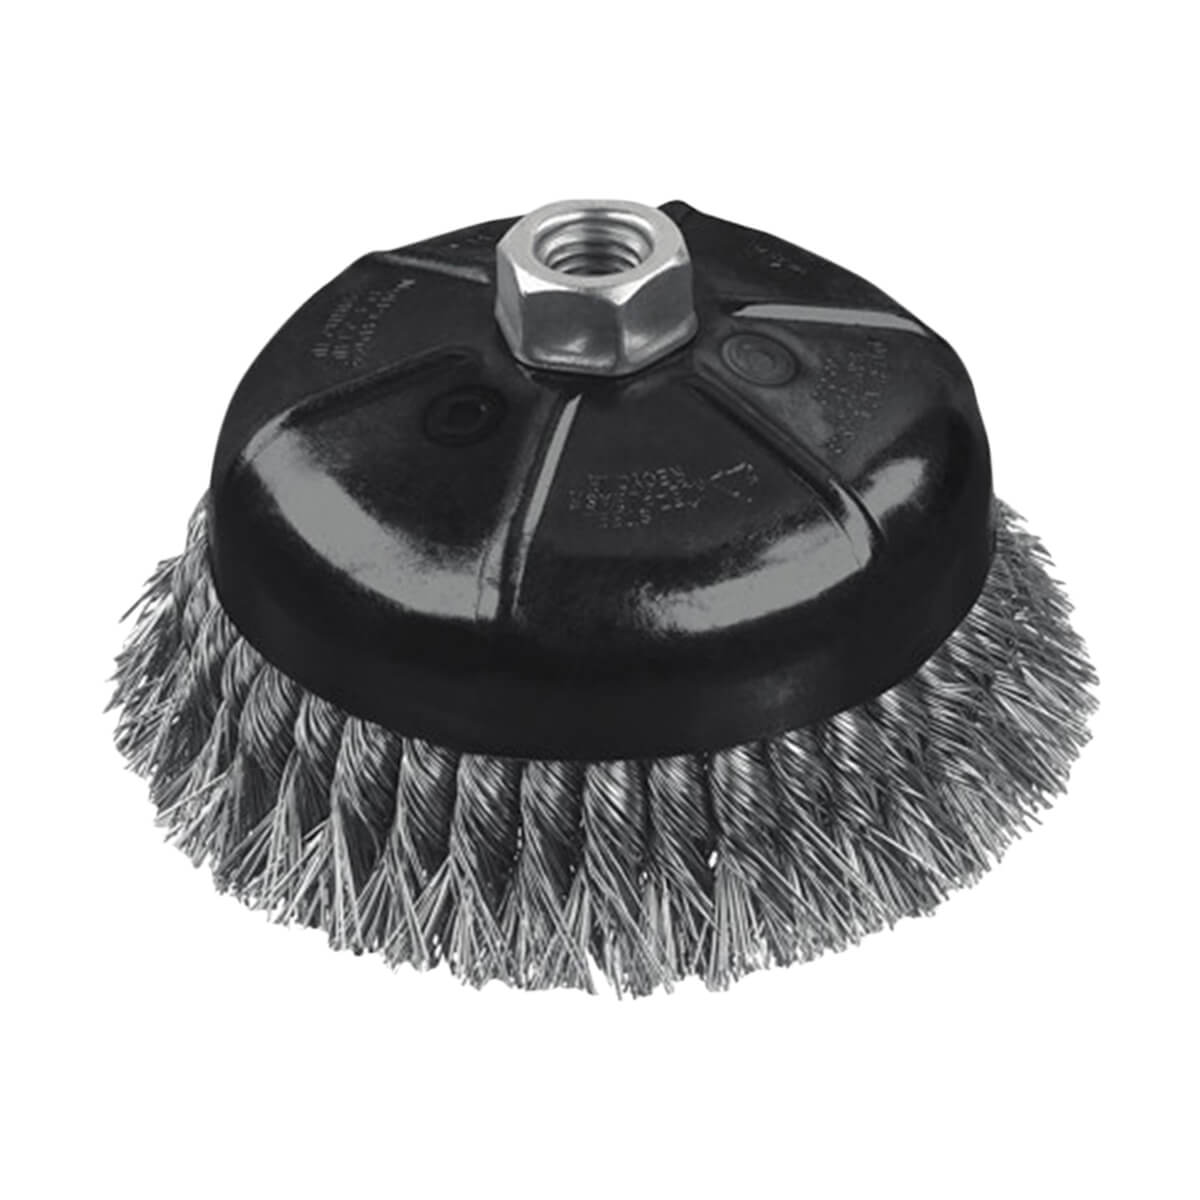 DEWALT 11 Knotted Cup Brush - 4-in X 5/8-in